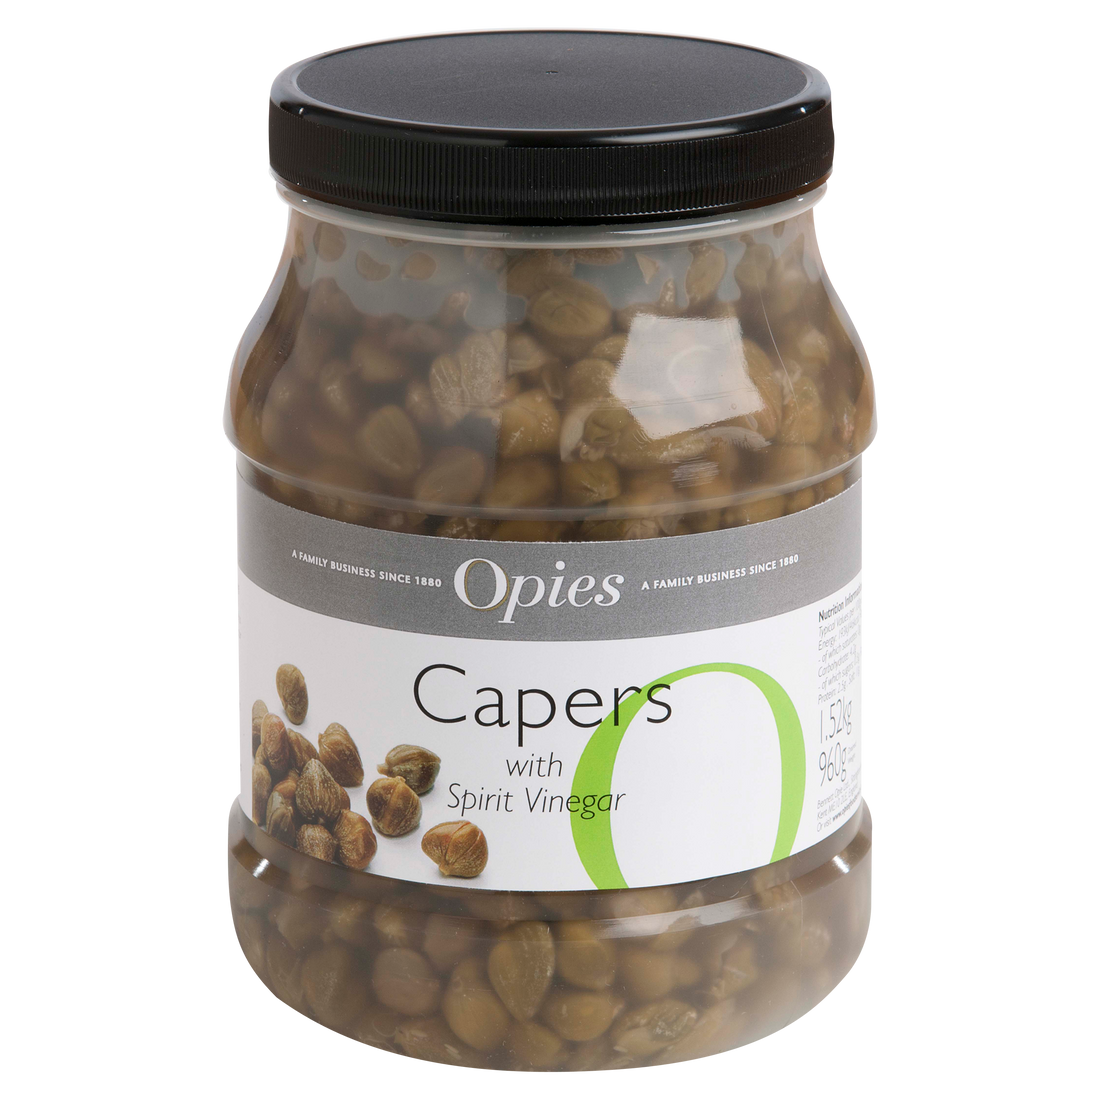 Opies Capers